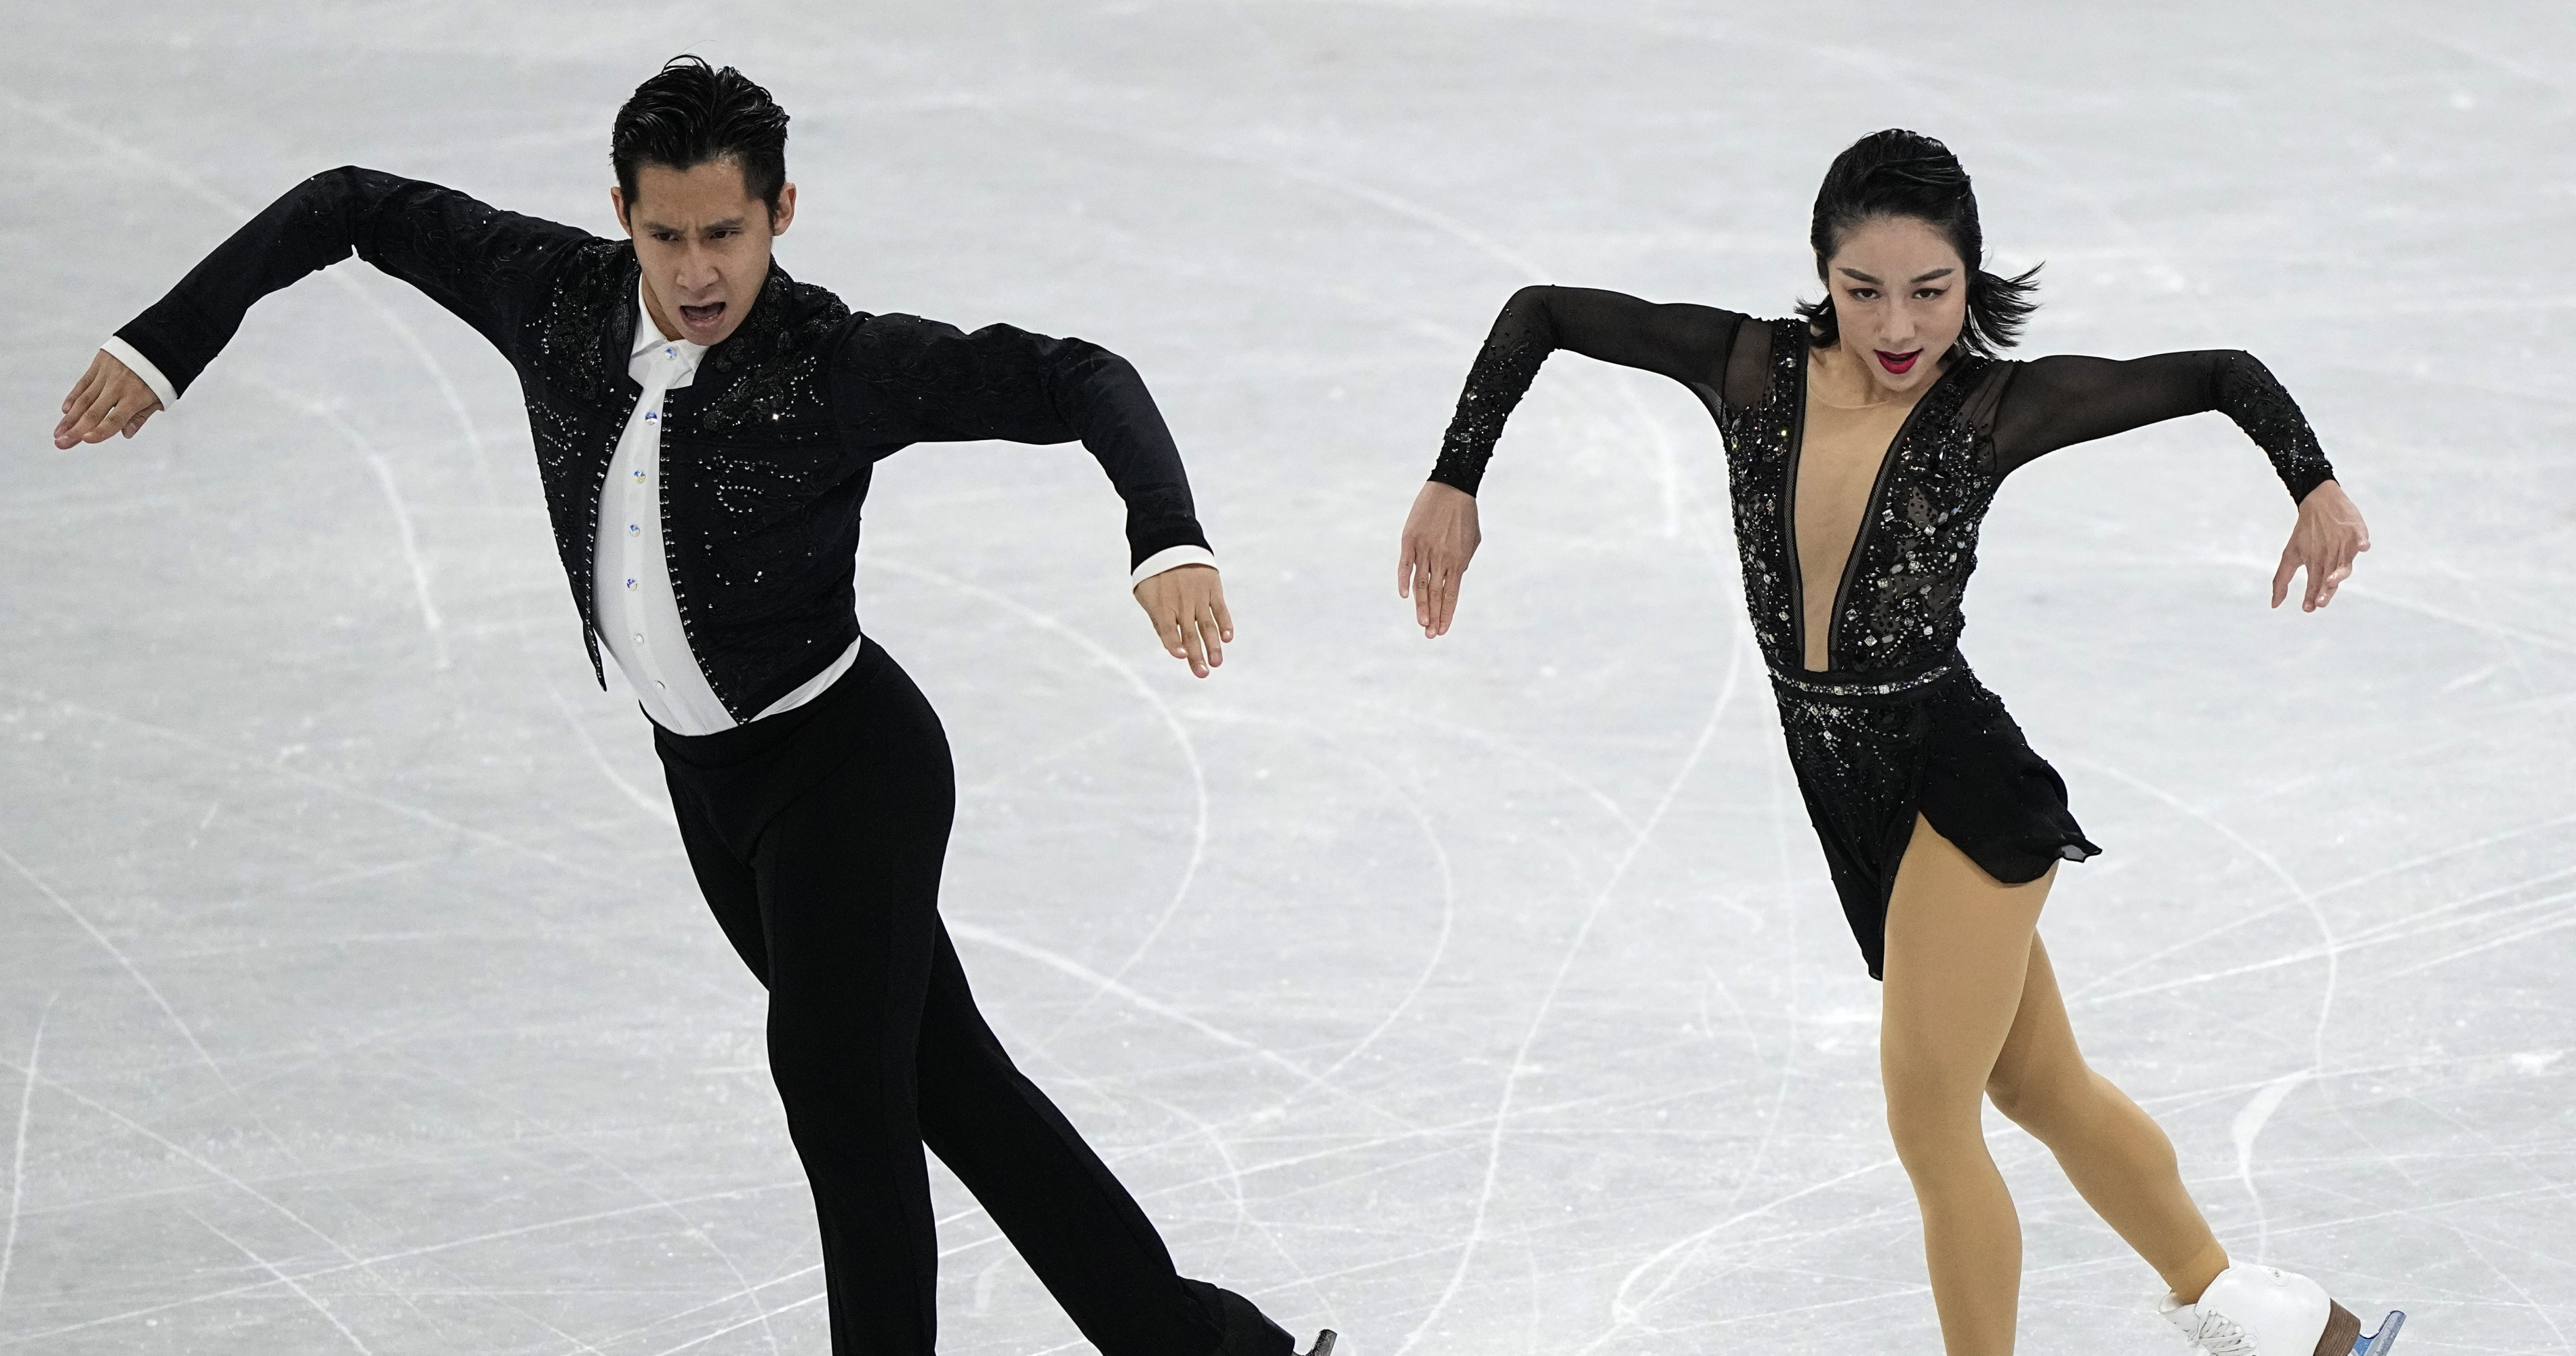 Pairs Figure Skating Results 2022 Sui, Han Hold Narrow Lead After